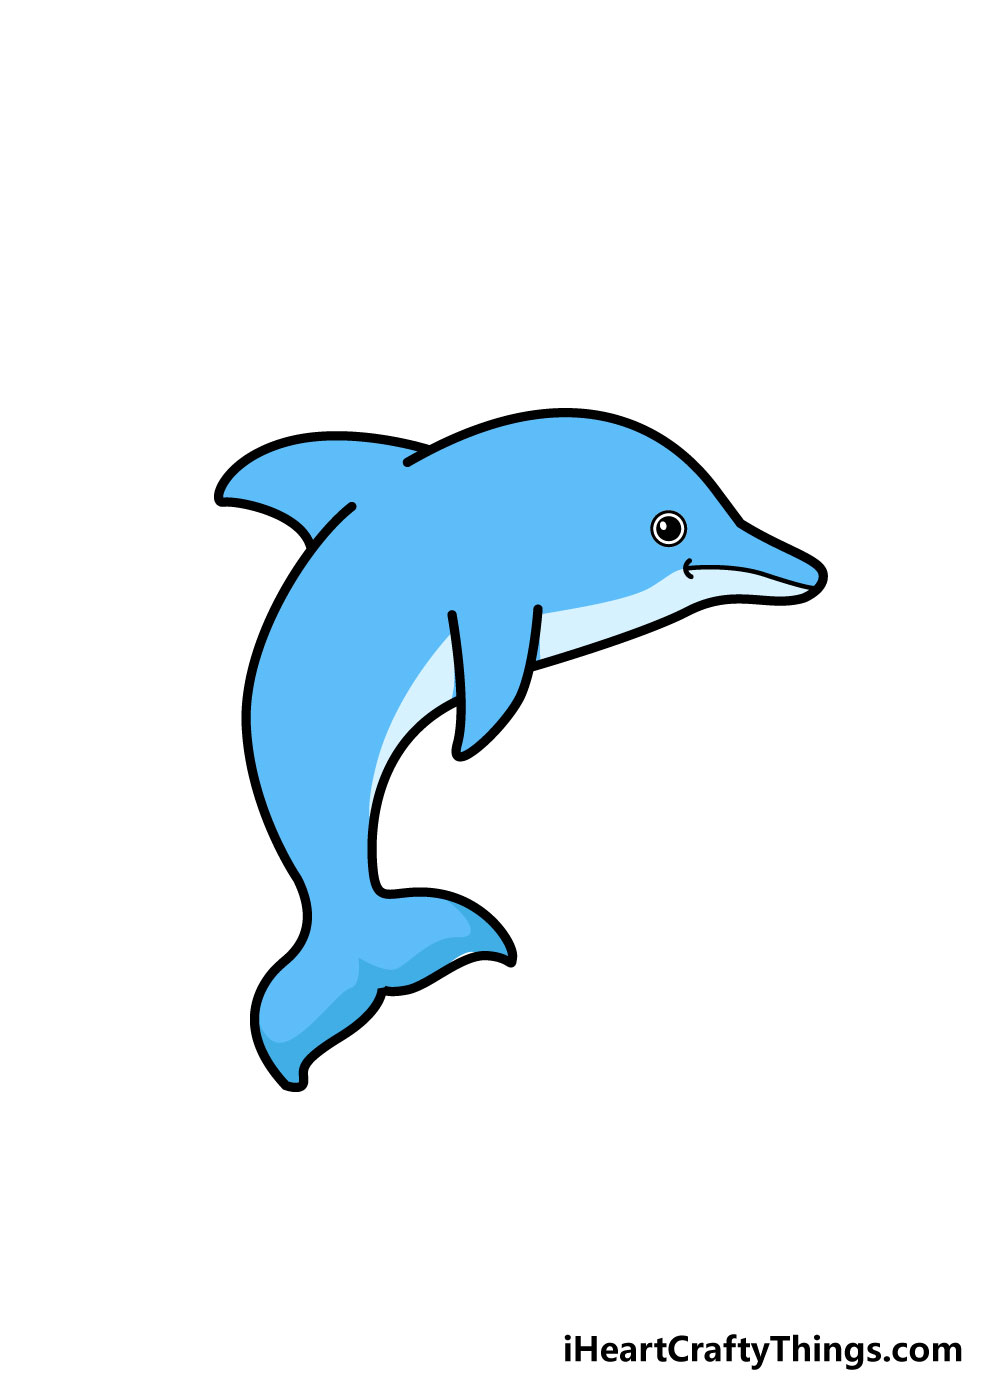 How to Draw a Dolphin in 6 Steps – Arteza.com